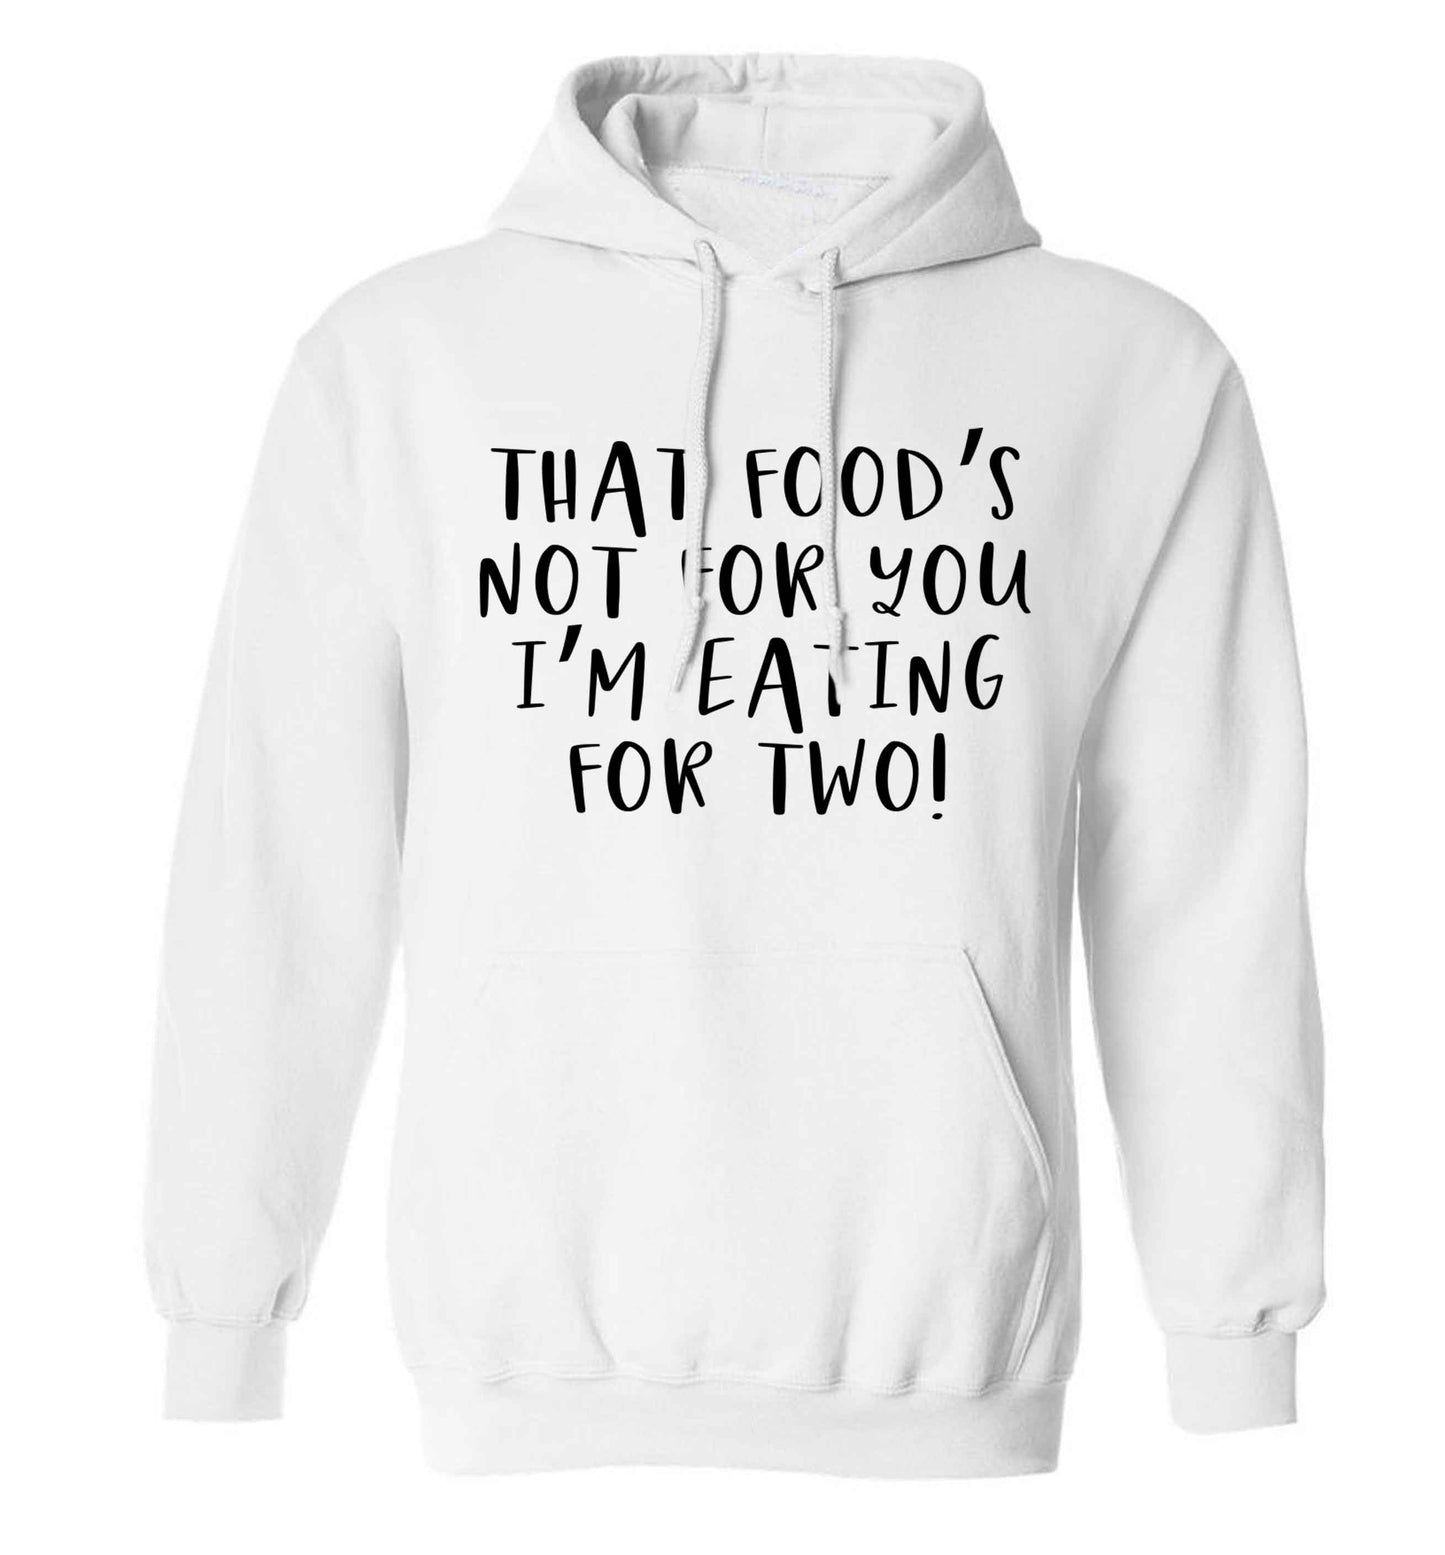 That food's not for you I'm eating for two adults unisex white hoodie 2XL